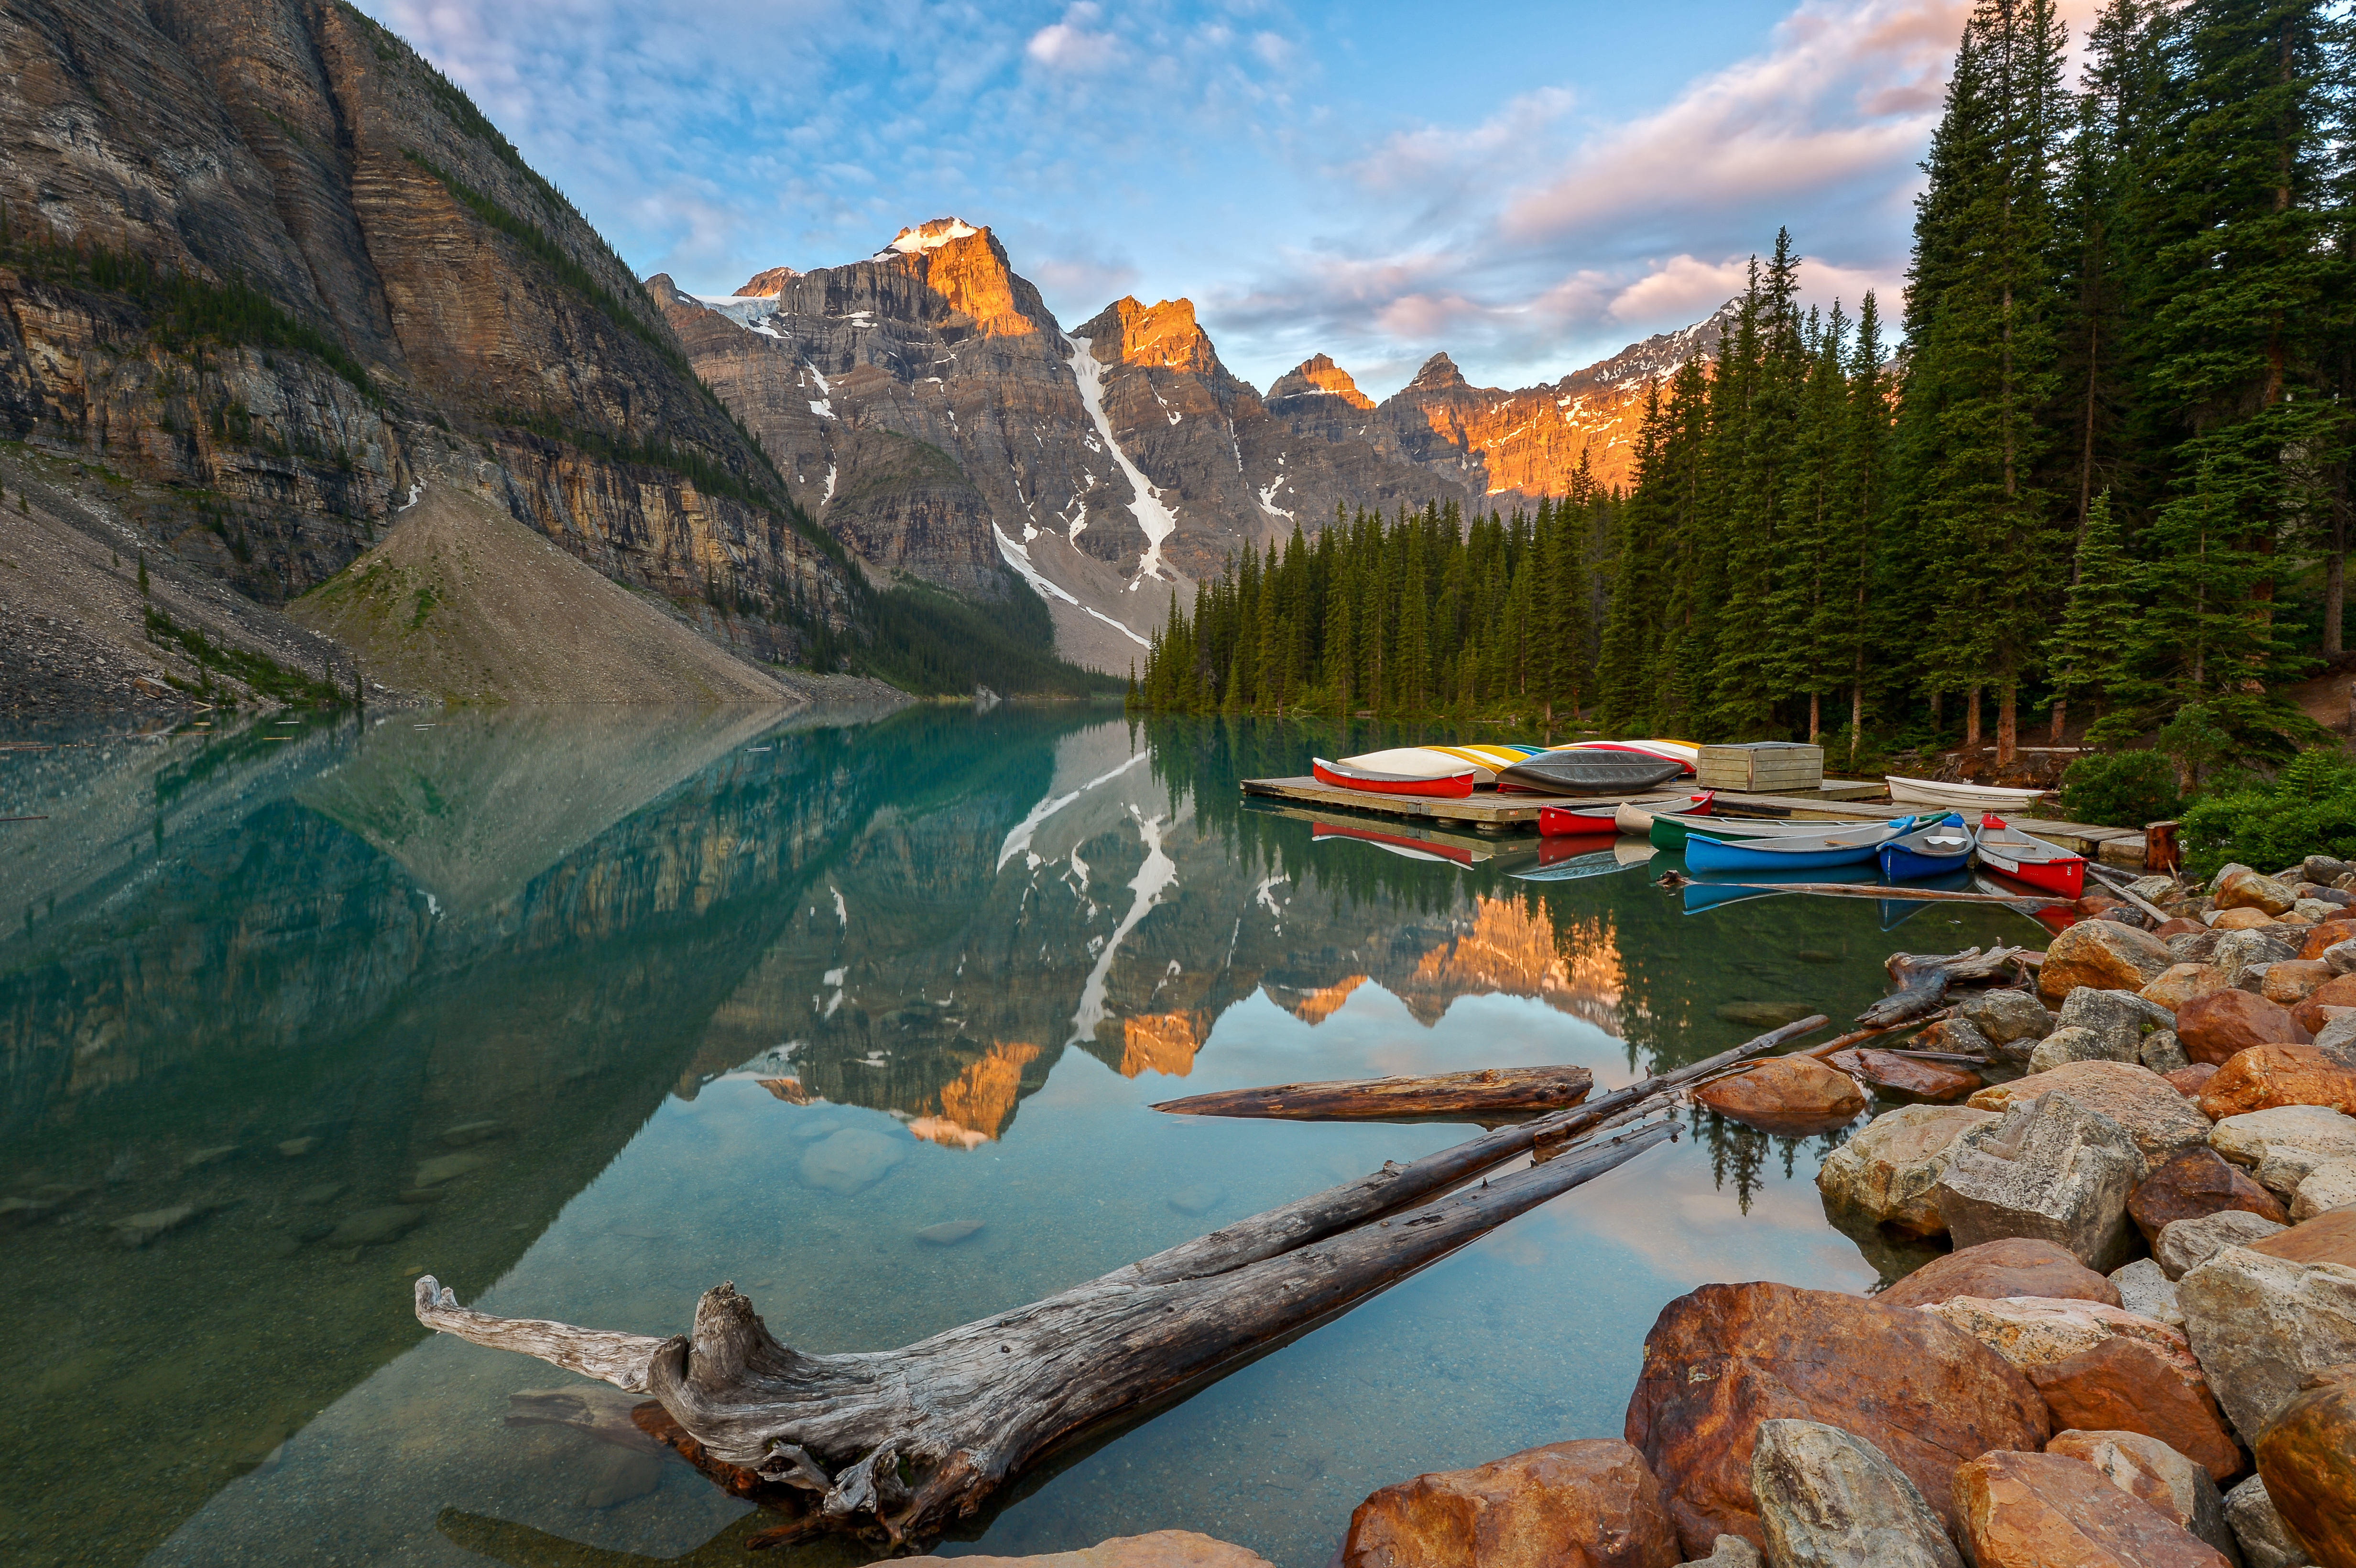 Early morning calm on the shores of Moraine Lake, one of the crown jewels of the Canadian Rockies!